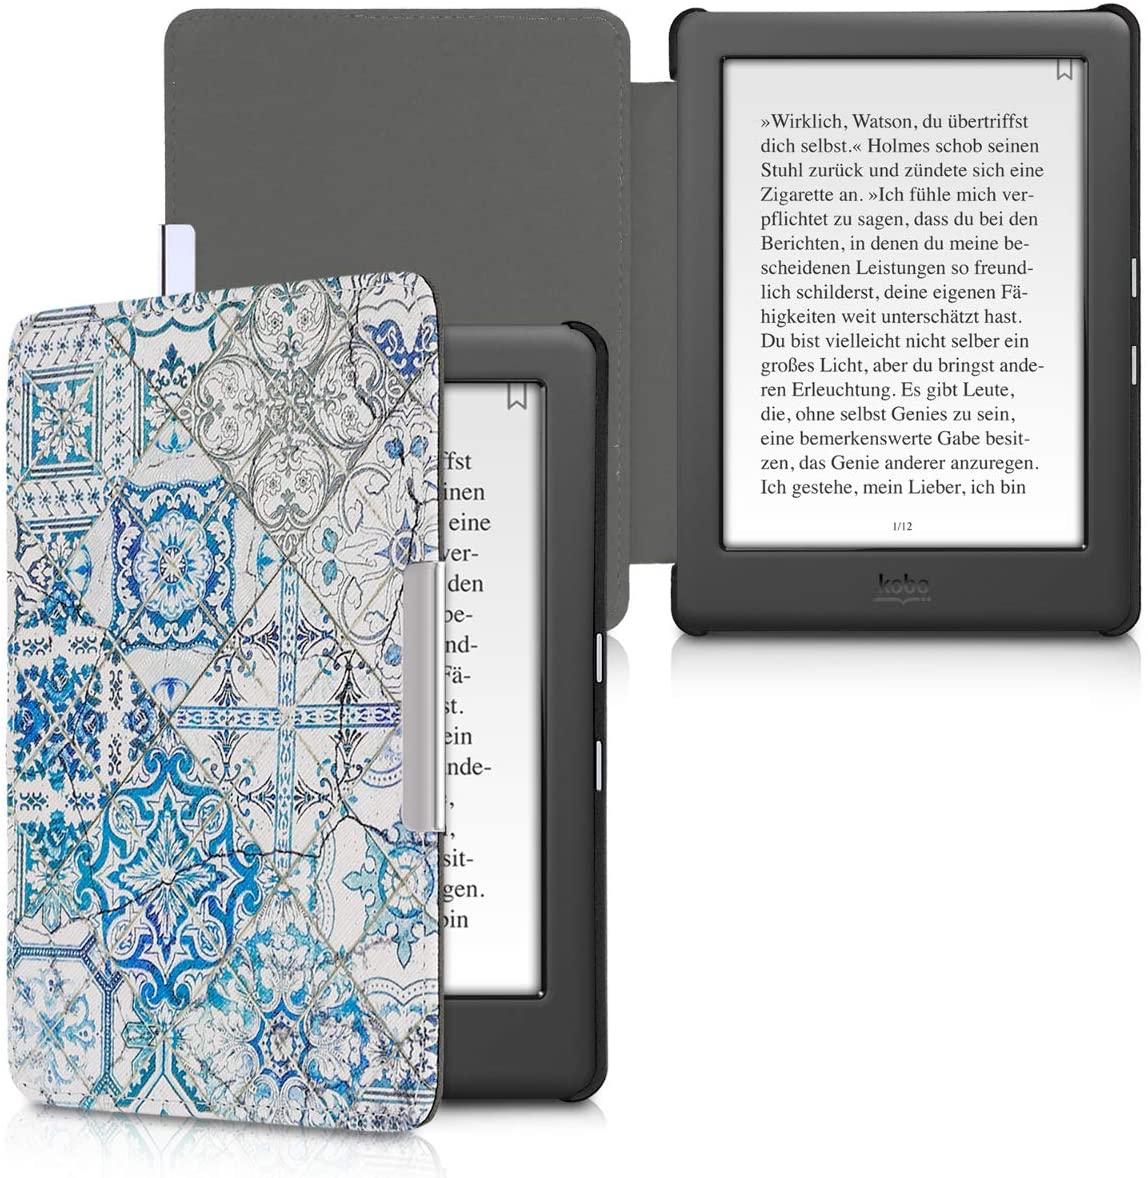 kwmobile Case Compatible with Kobo Glo HD/Touch 2.0 - e4cents